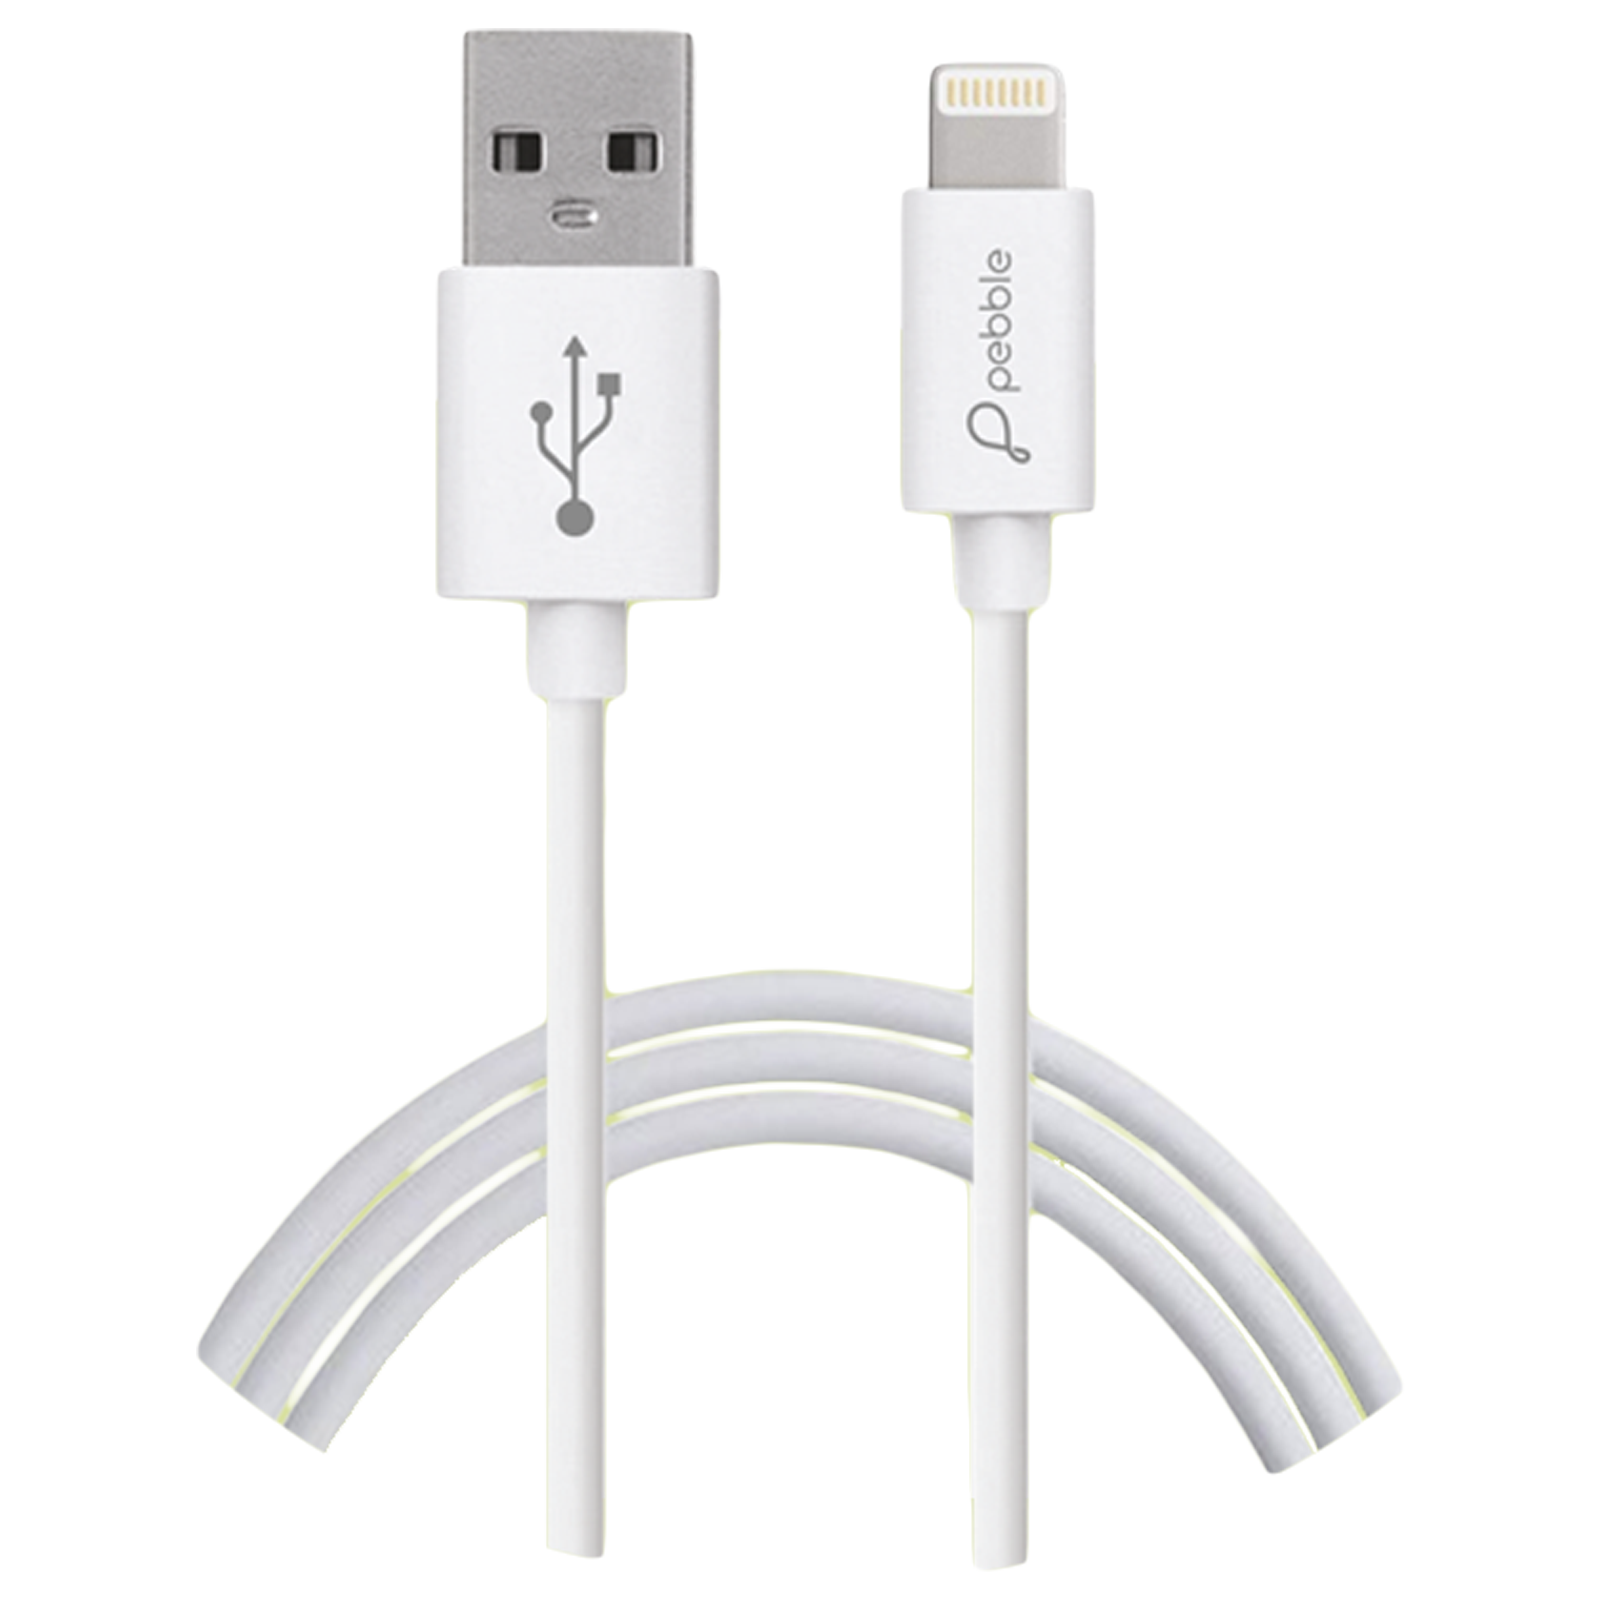 Pebble Copper 1 Meter USB 2.0 (Type-A) to Lightning Power/Charging, Data Transfer USB Cable (Fast Charging, PBCL10, White)_1